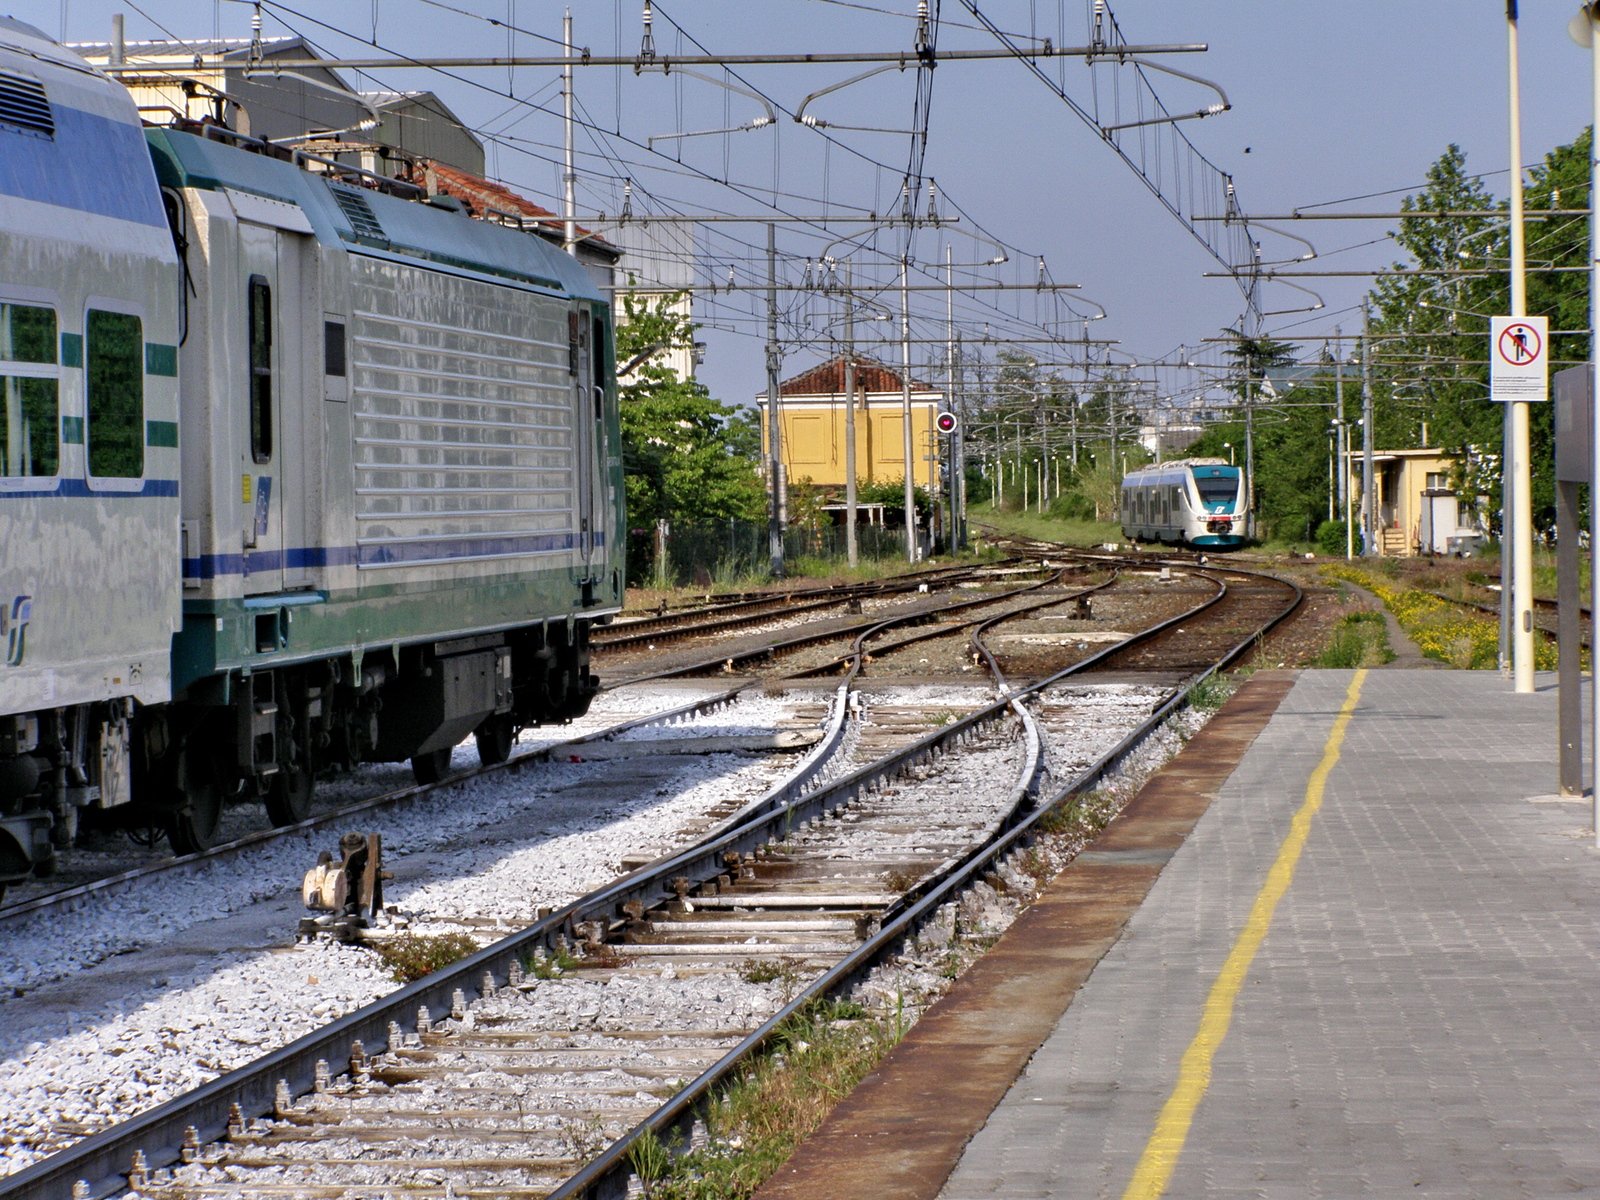 the passenger train is passing through an empty train station